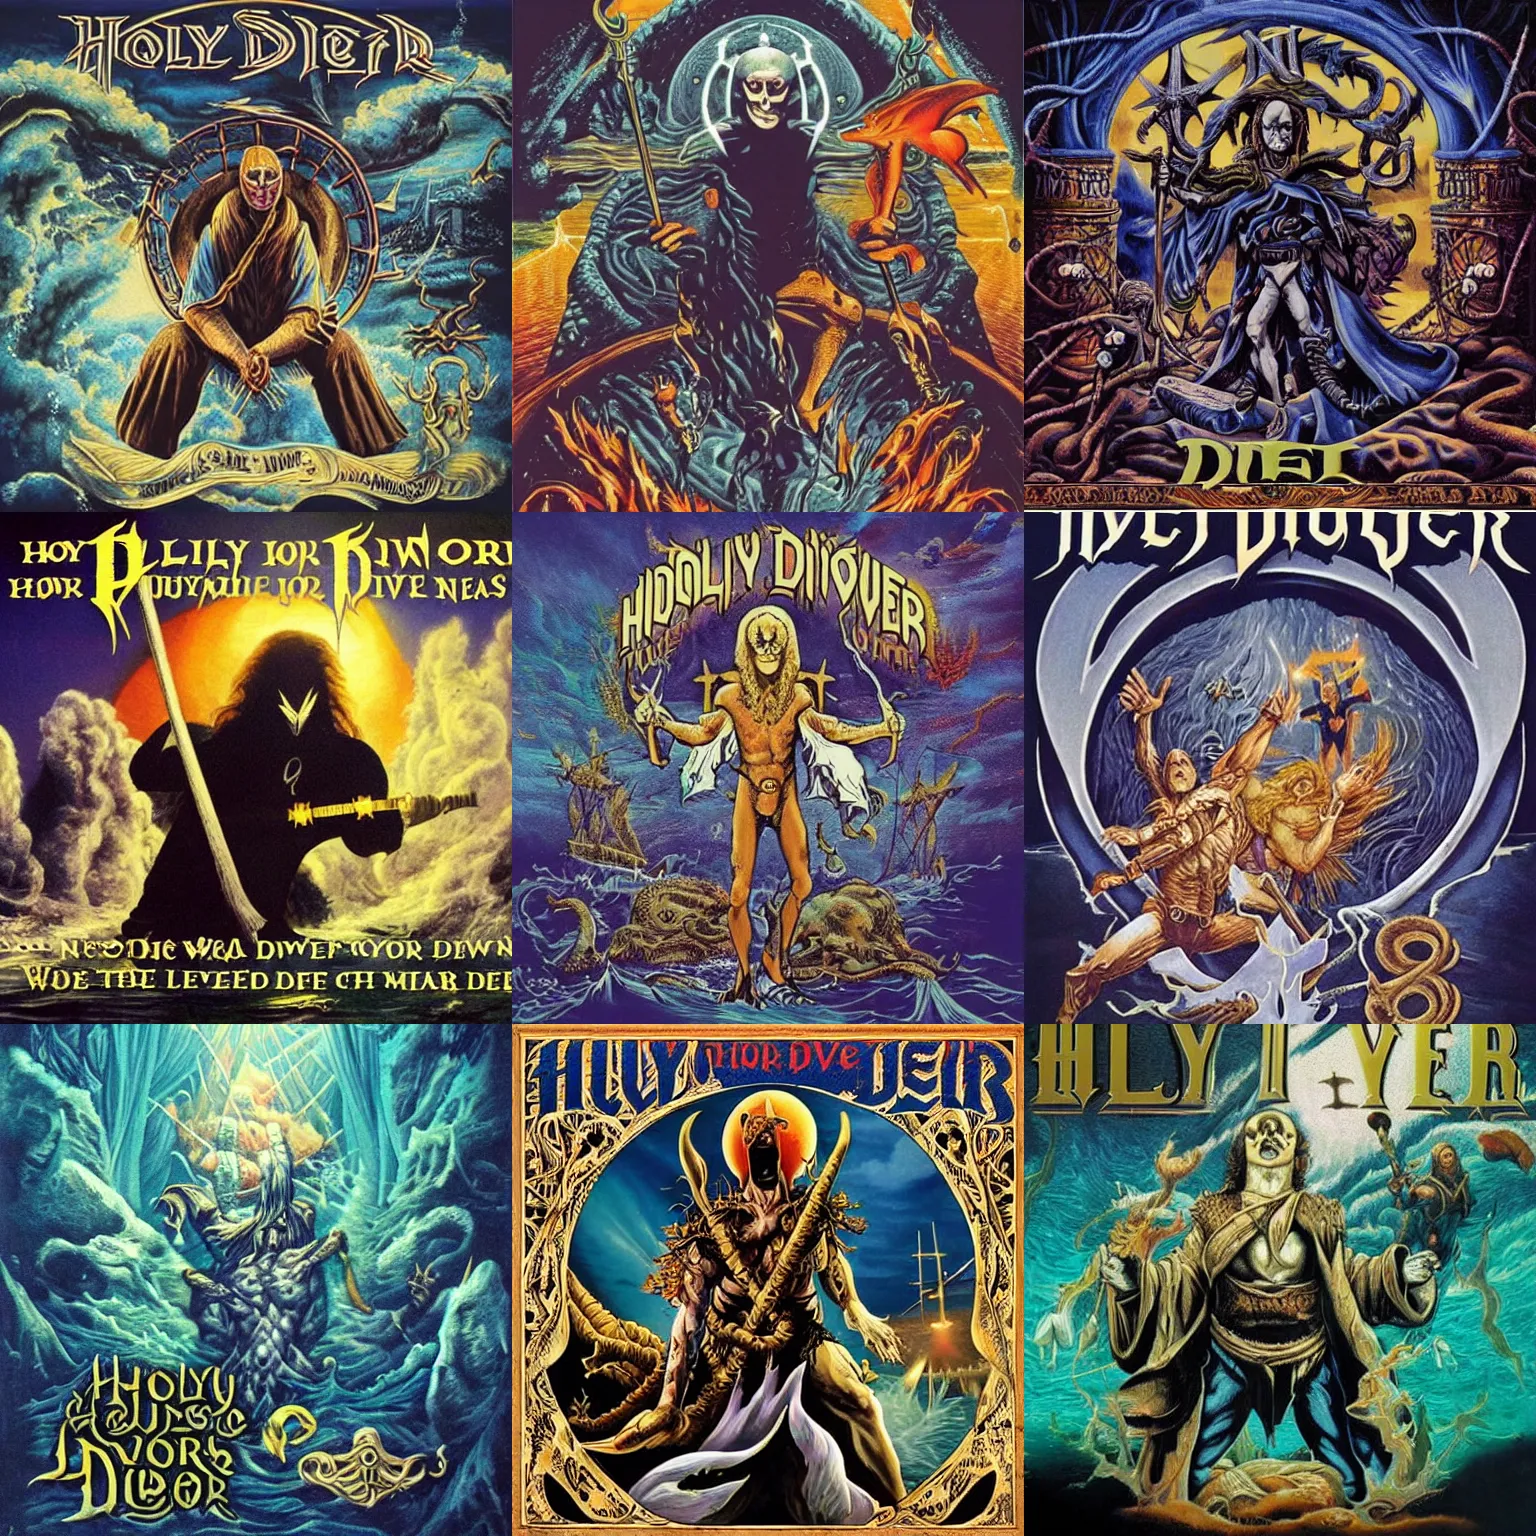 Prompt: holy diver you've been down too long in the midnight sea oh, what's becoming of me? between the velvet lies there's a truth that's hard as steel, yeah the vision never dies life's a never ending wheel, say holy diver you're the star of the masquerade no need to look so afraid